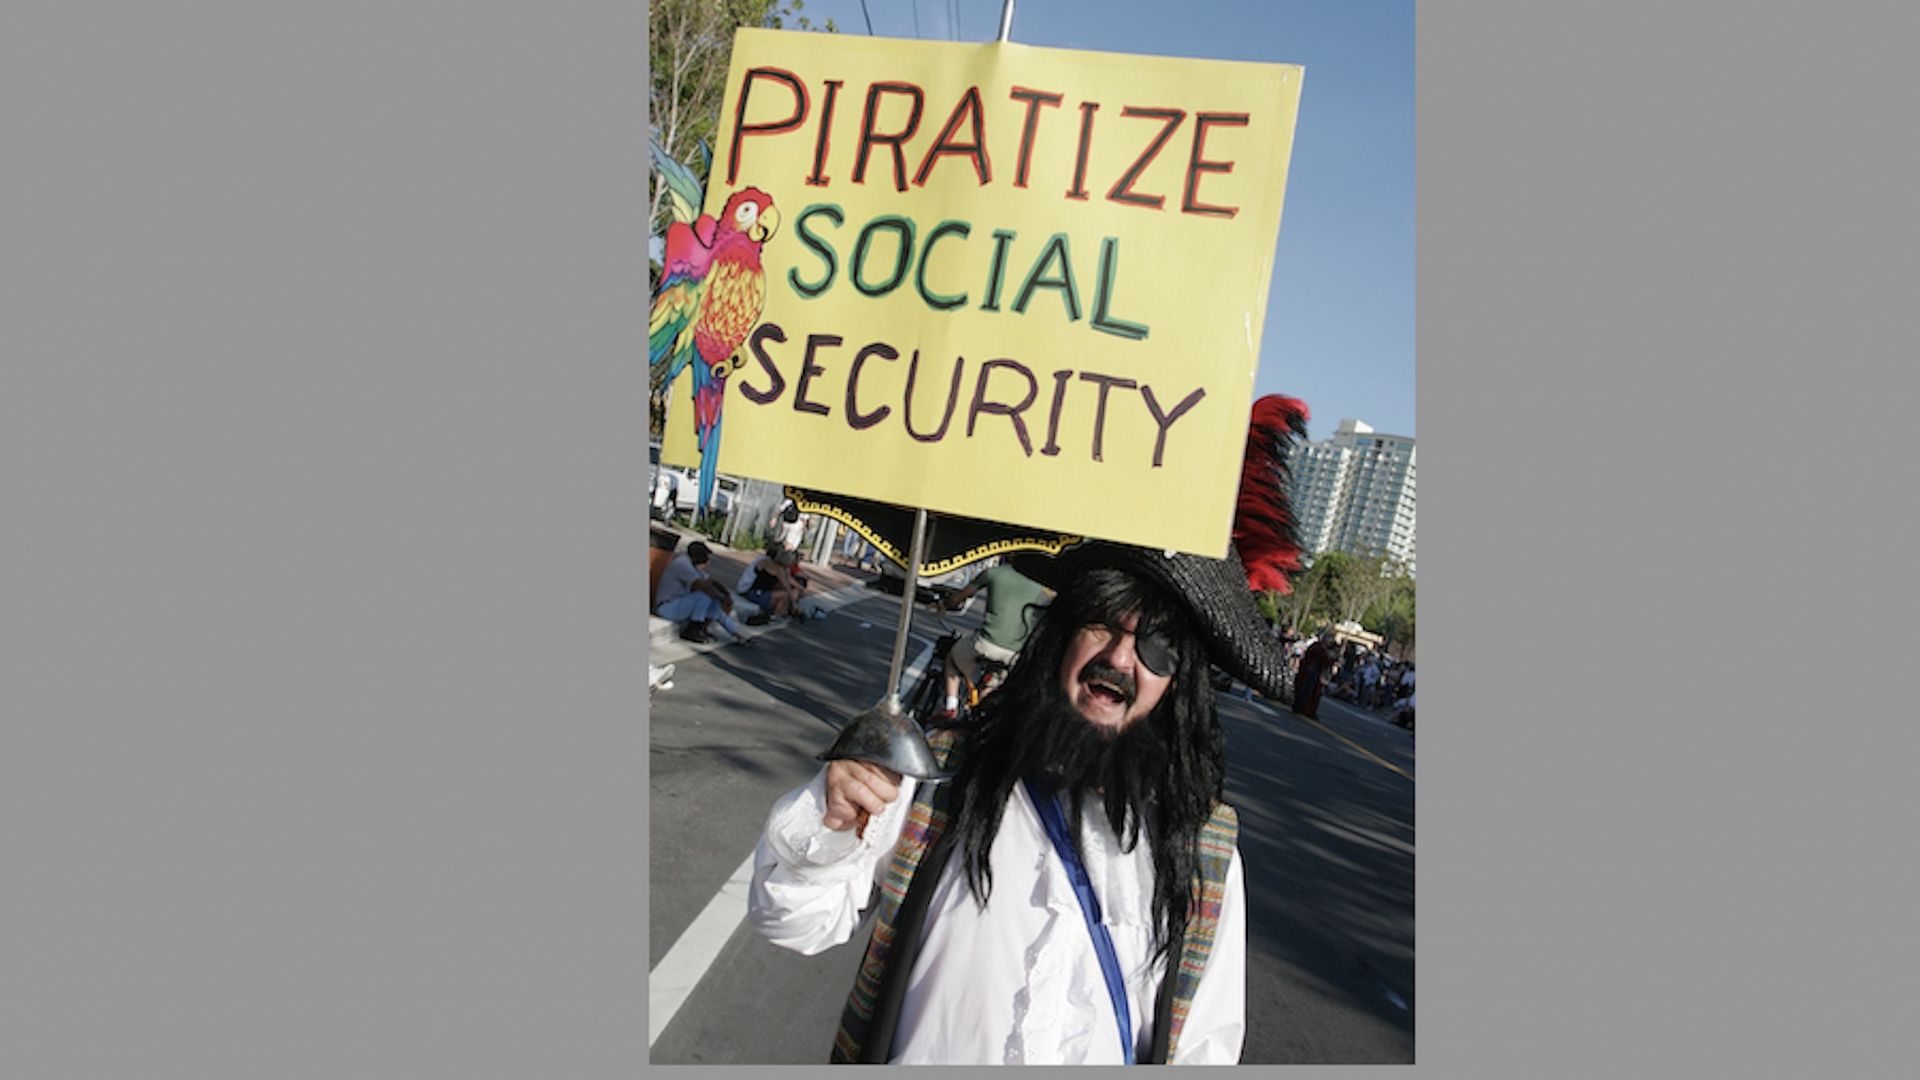 A person dressed as a pirate holds a sign saying "Piratize social security" 